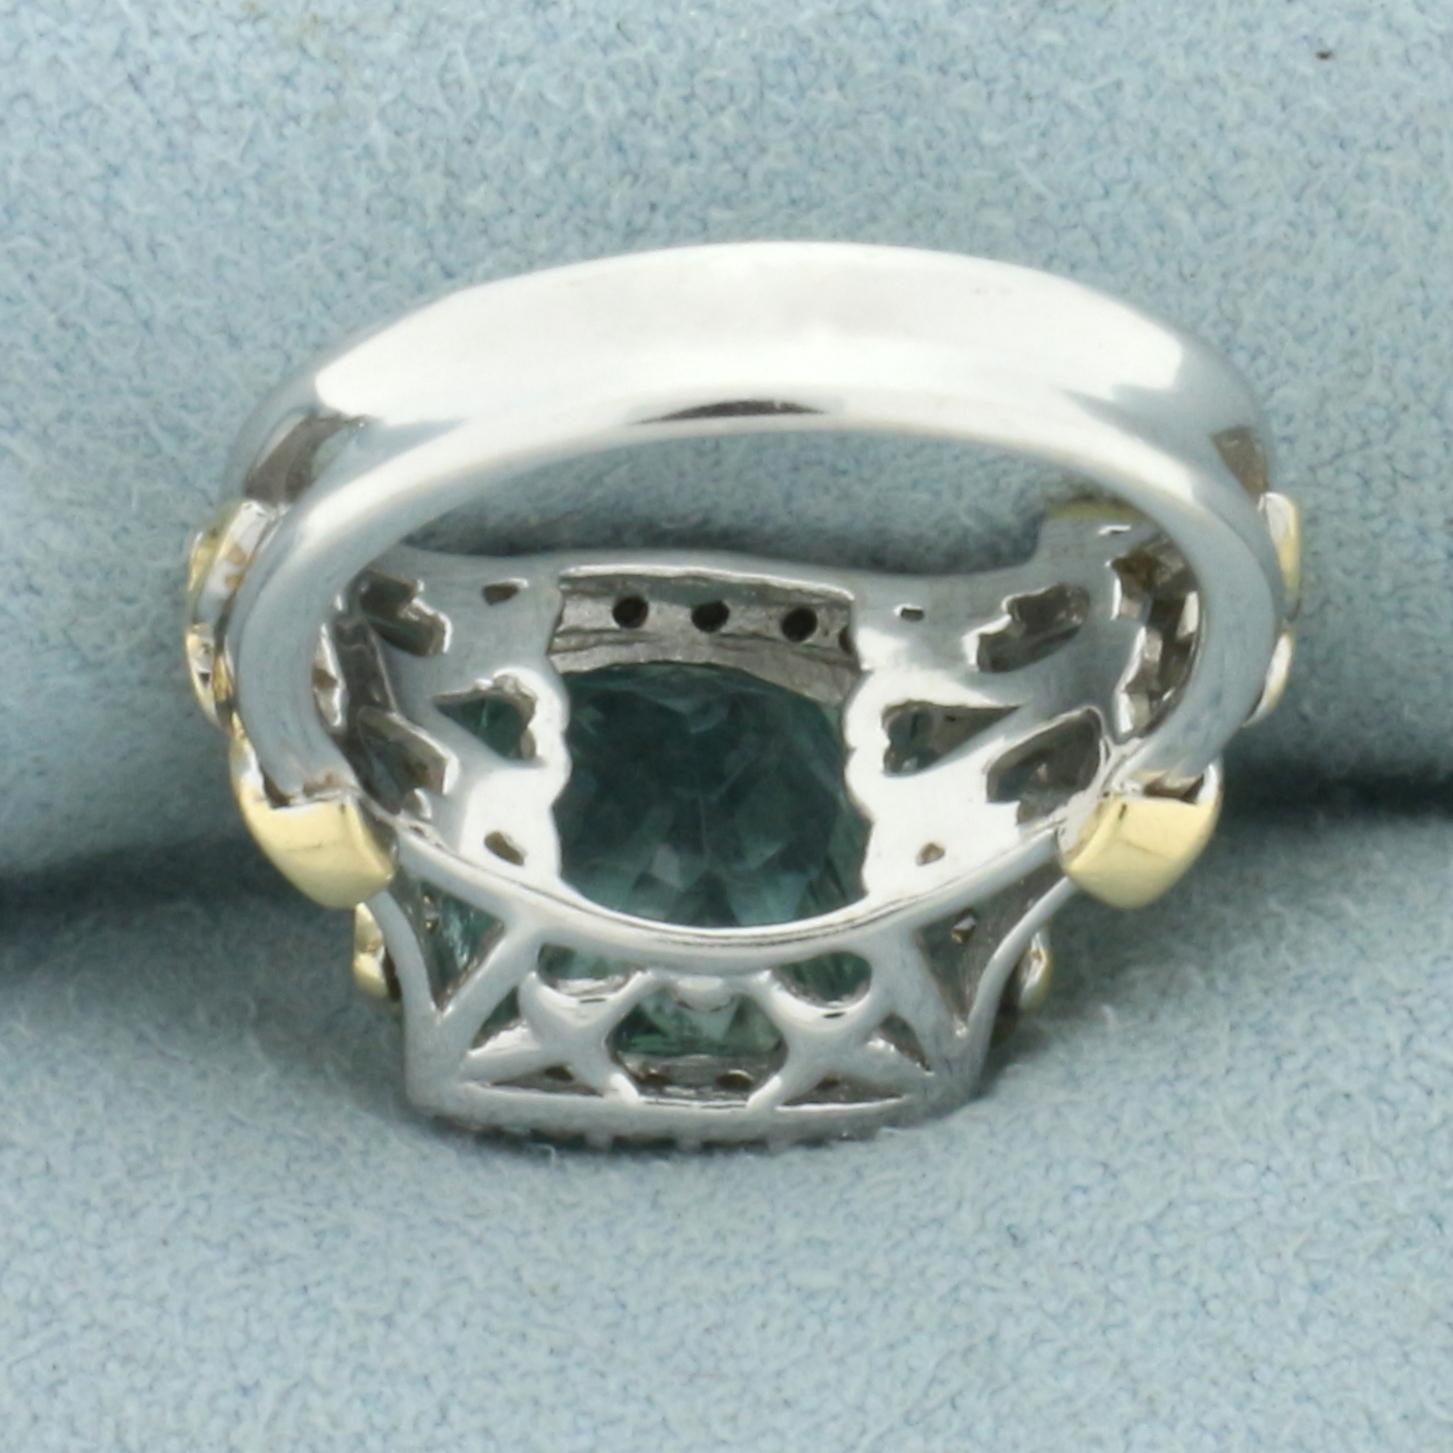 Fancy Checkerboard Cut Aquamarine And Diamond Ring In 14k White And Yellow Gold